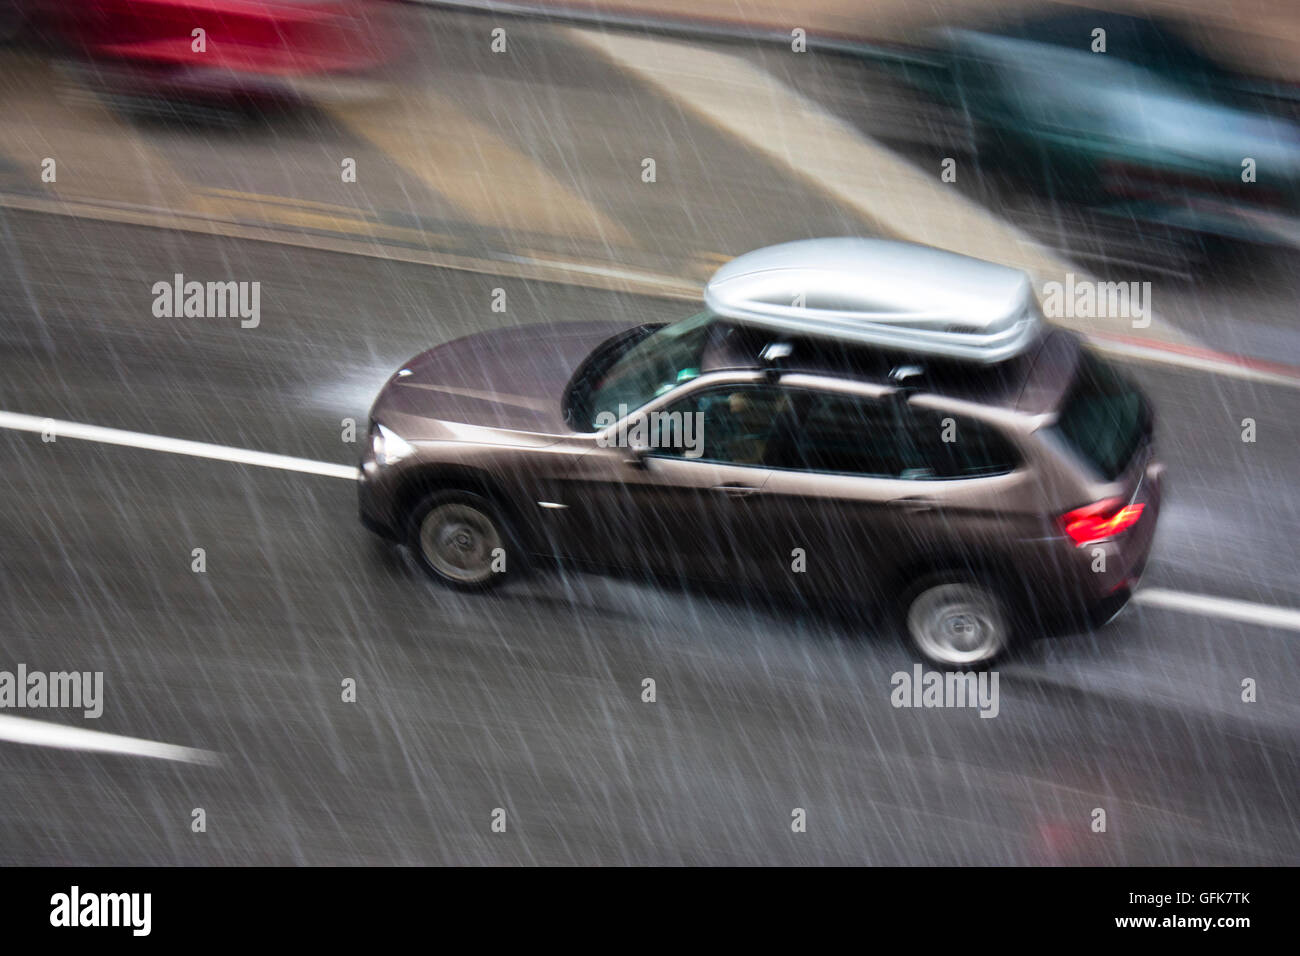 Rainy day in the city: A driving car, with a storage box on the roof, in the street hit by the heavy rain with hail, in motion b Stock Photo